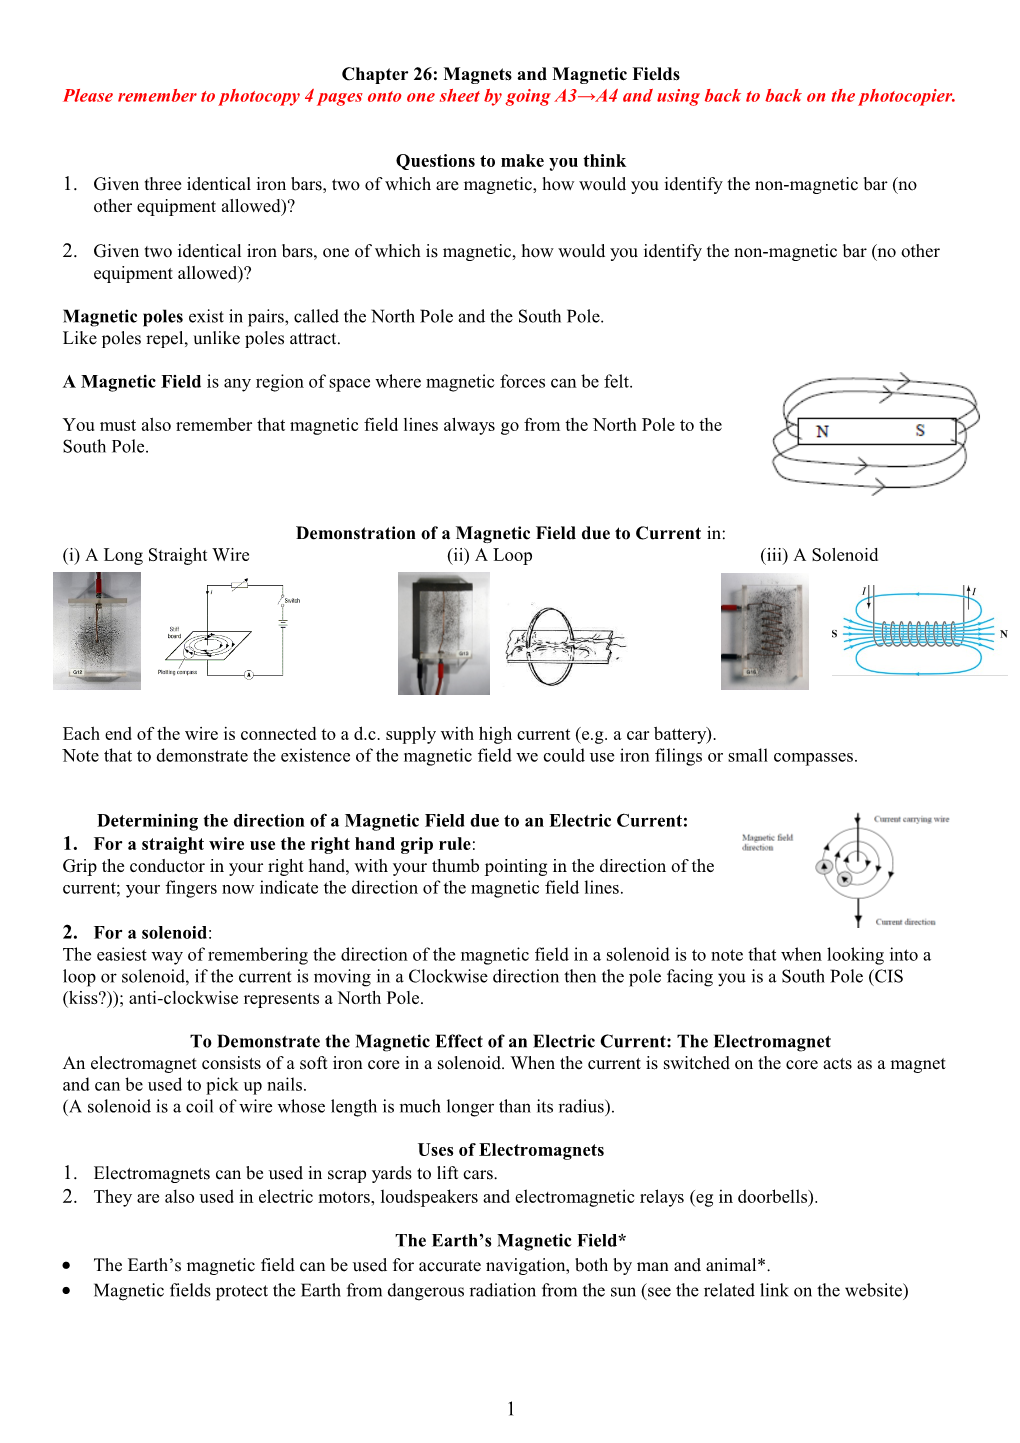 Chapter 26: Magnets and Magnetic Fields